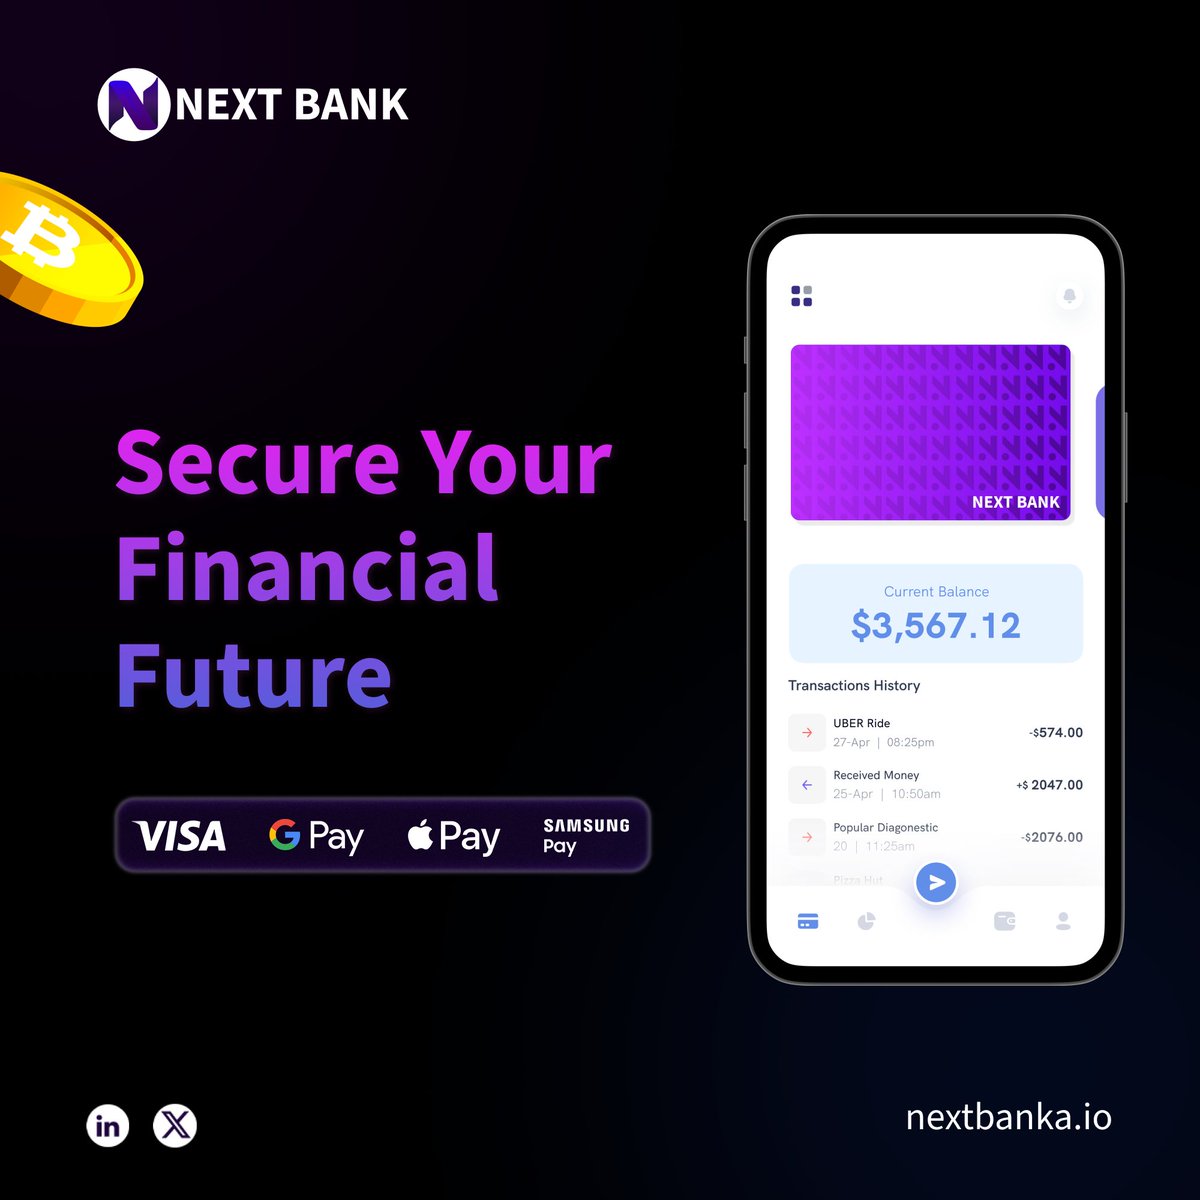 Swipe, spend, and stay ahead with NextBank's Crypto Visa Debit Card. Welcome to a new era of effortless transactions. 

Learn More👉 nextbanka.io

#web3community #NFTCommunity  #Crypto #DebitCard #NextBank